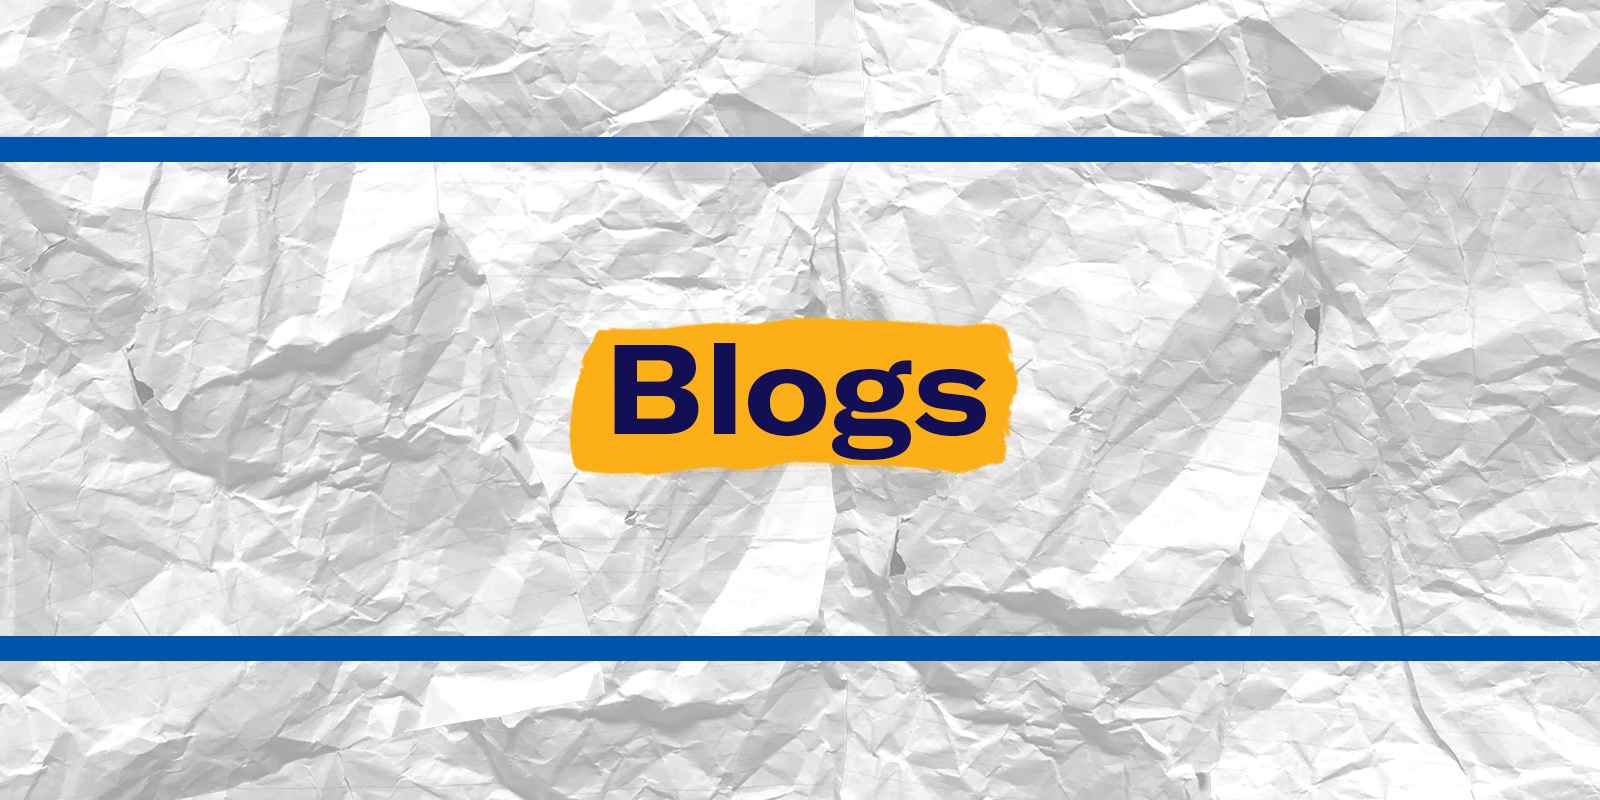 The word 'Blogs' in navy font, with small blue rectangles above and below, on a background of crumpled and wrinkled notebook paper